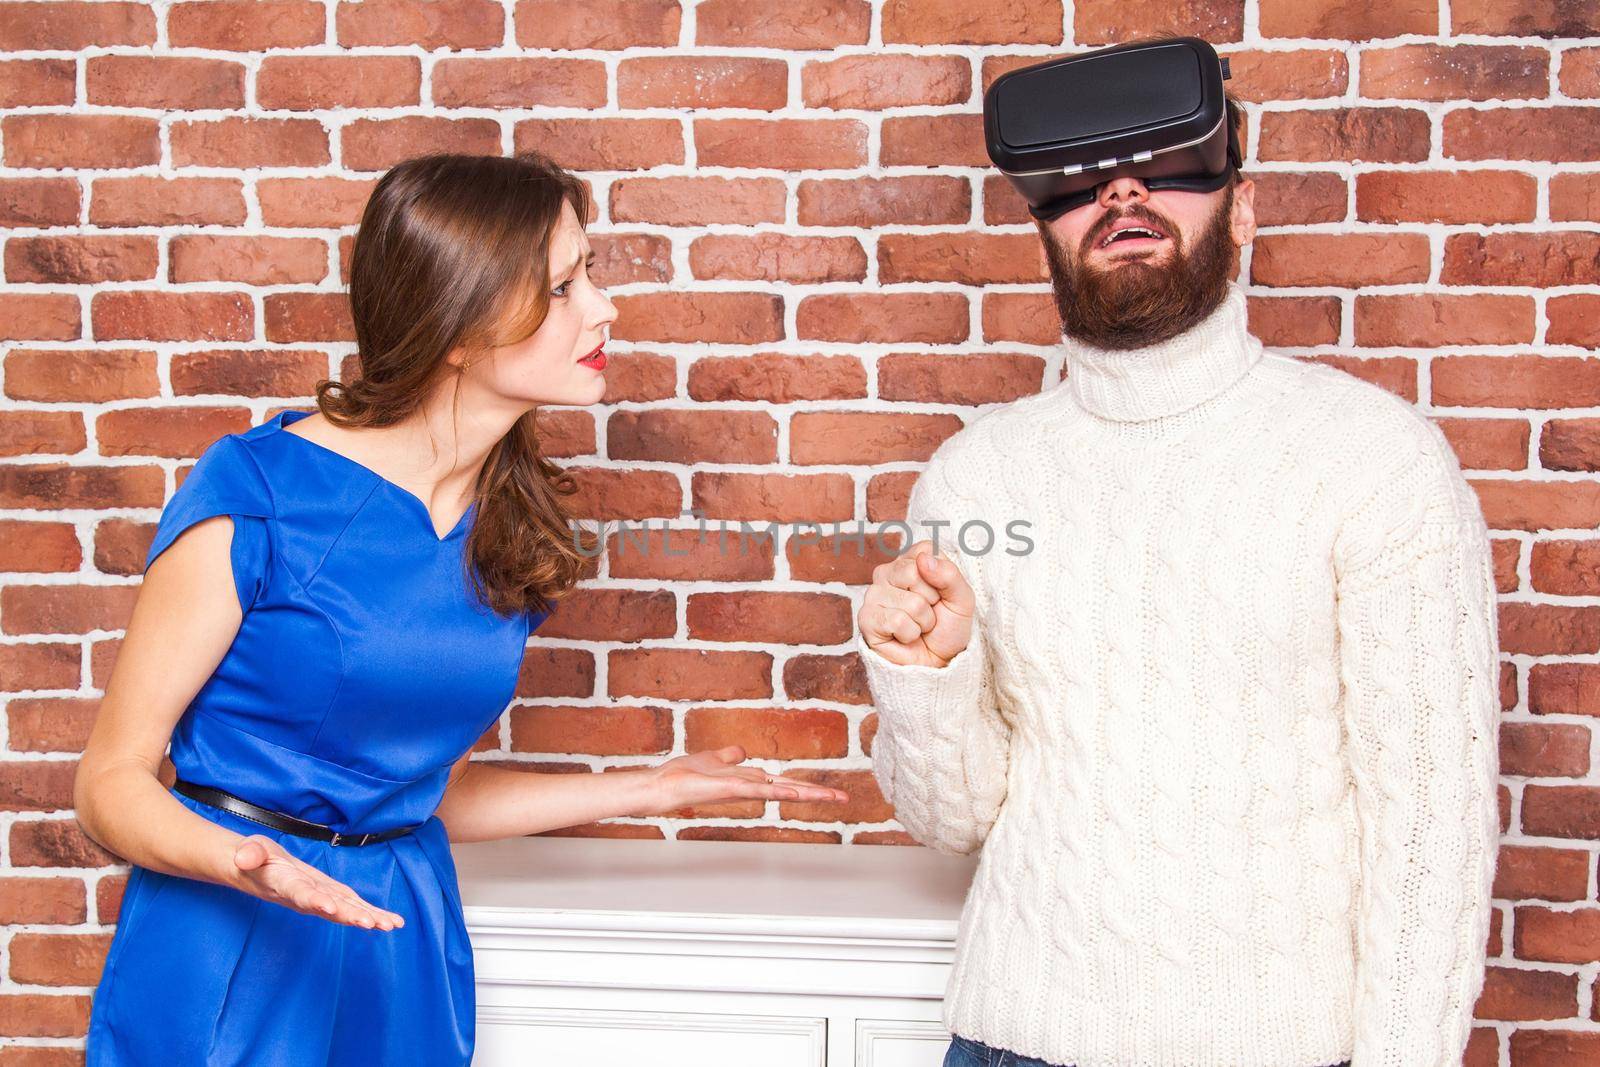 man using vr headset and his wife is angry. by Khosro1